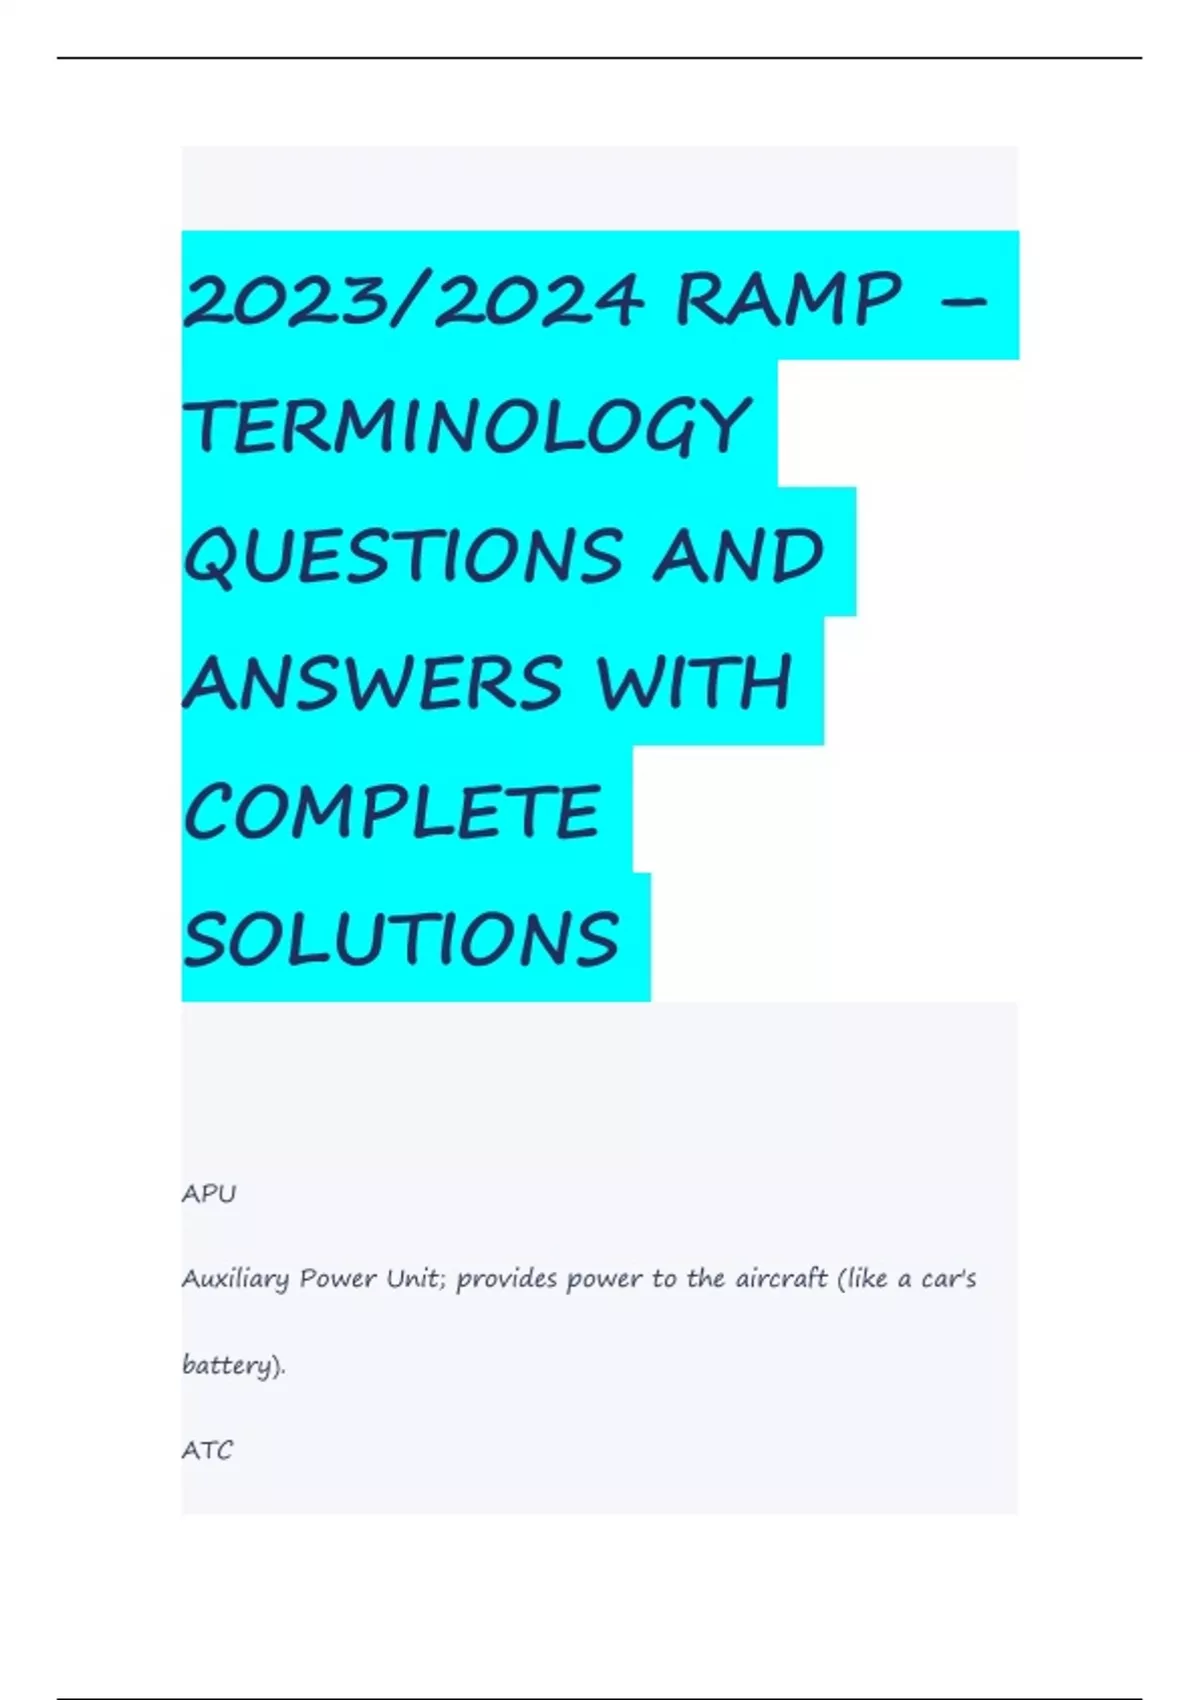 2023/2024 RAMP TERMINOLOGY QUESTIONS AND ANSWERS WITH COMPLETE